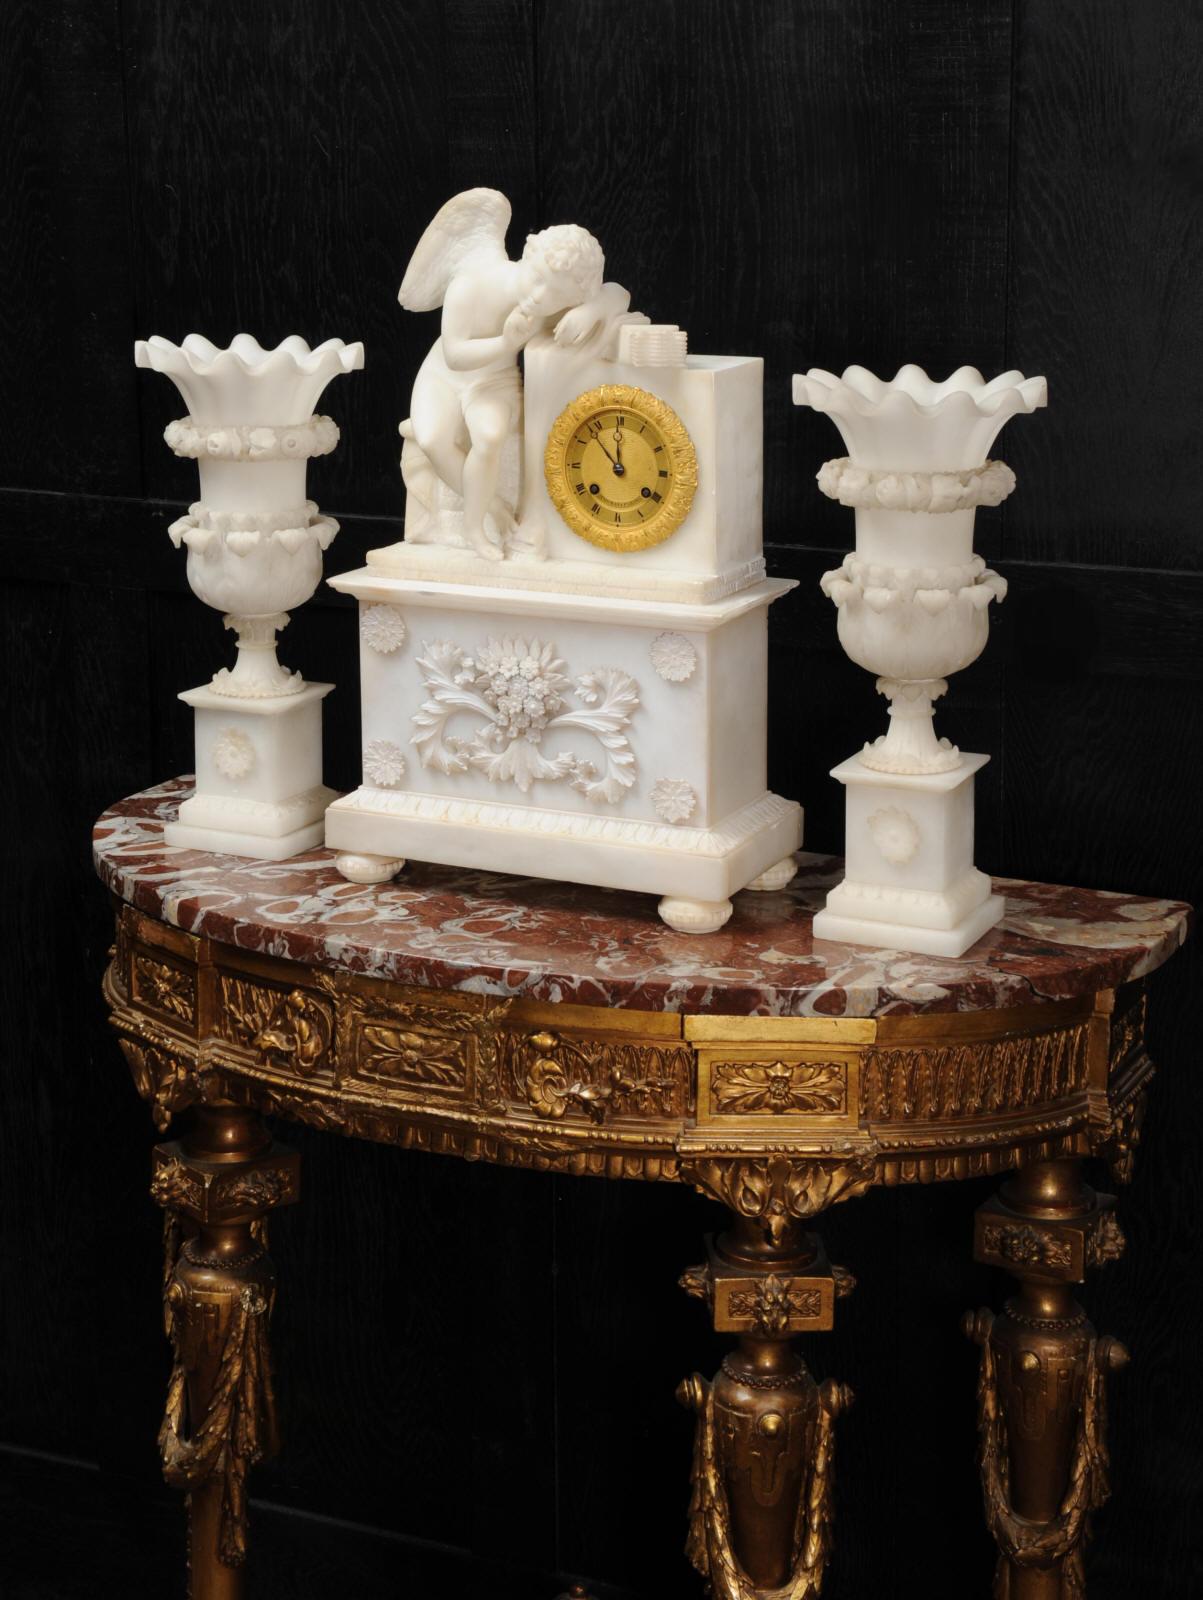 An early and stunning clock set, circa 1820, featuring a charming figure of Cupid, L’Amour Menaçant (Menacing Love) after the famous sculpture by Falconet currently in the Louvre. It is beautifully carved from crisp white alabaster, Cupid leans on